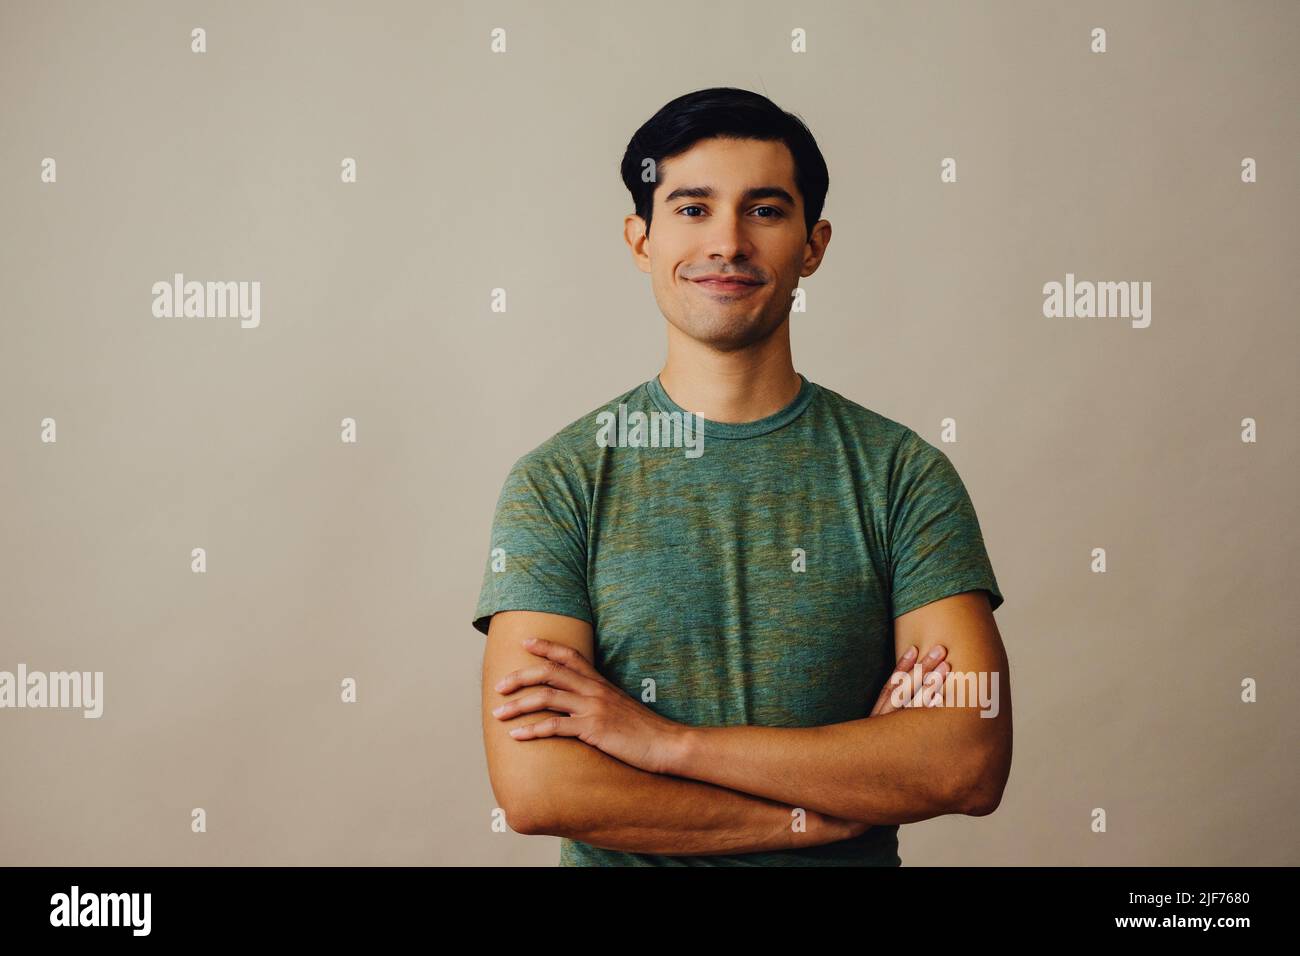 Portrait latino man with arms crossed and black hair smiling handsome young adult green t-shirt over gray background looking at camera studio shot Stock Photo